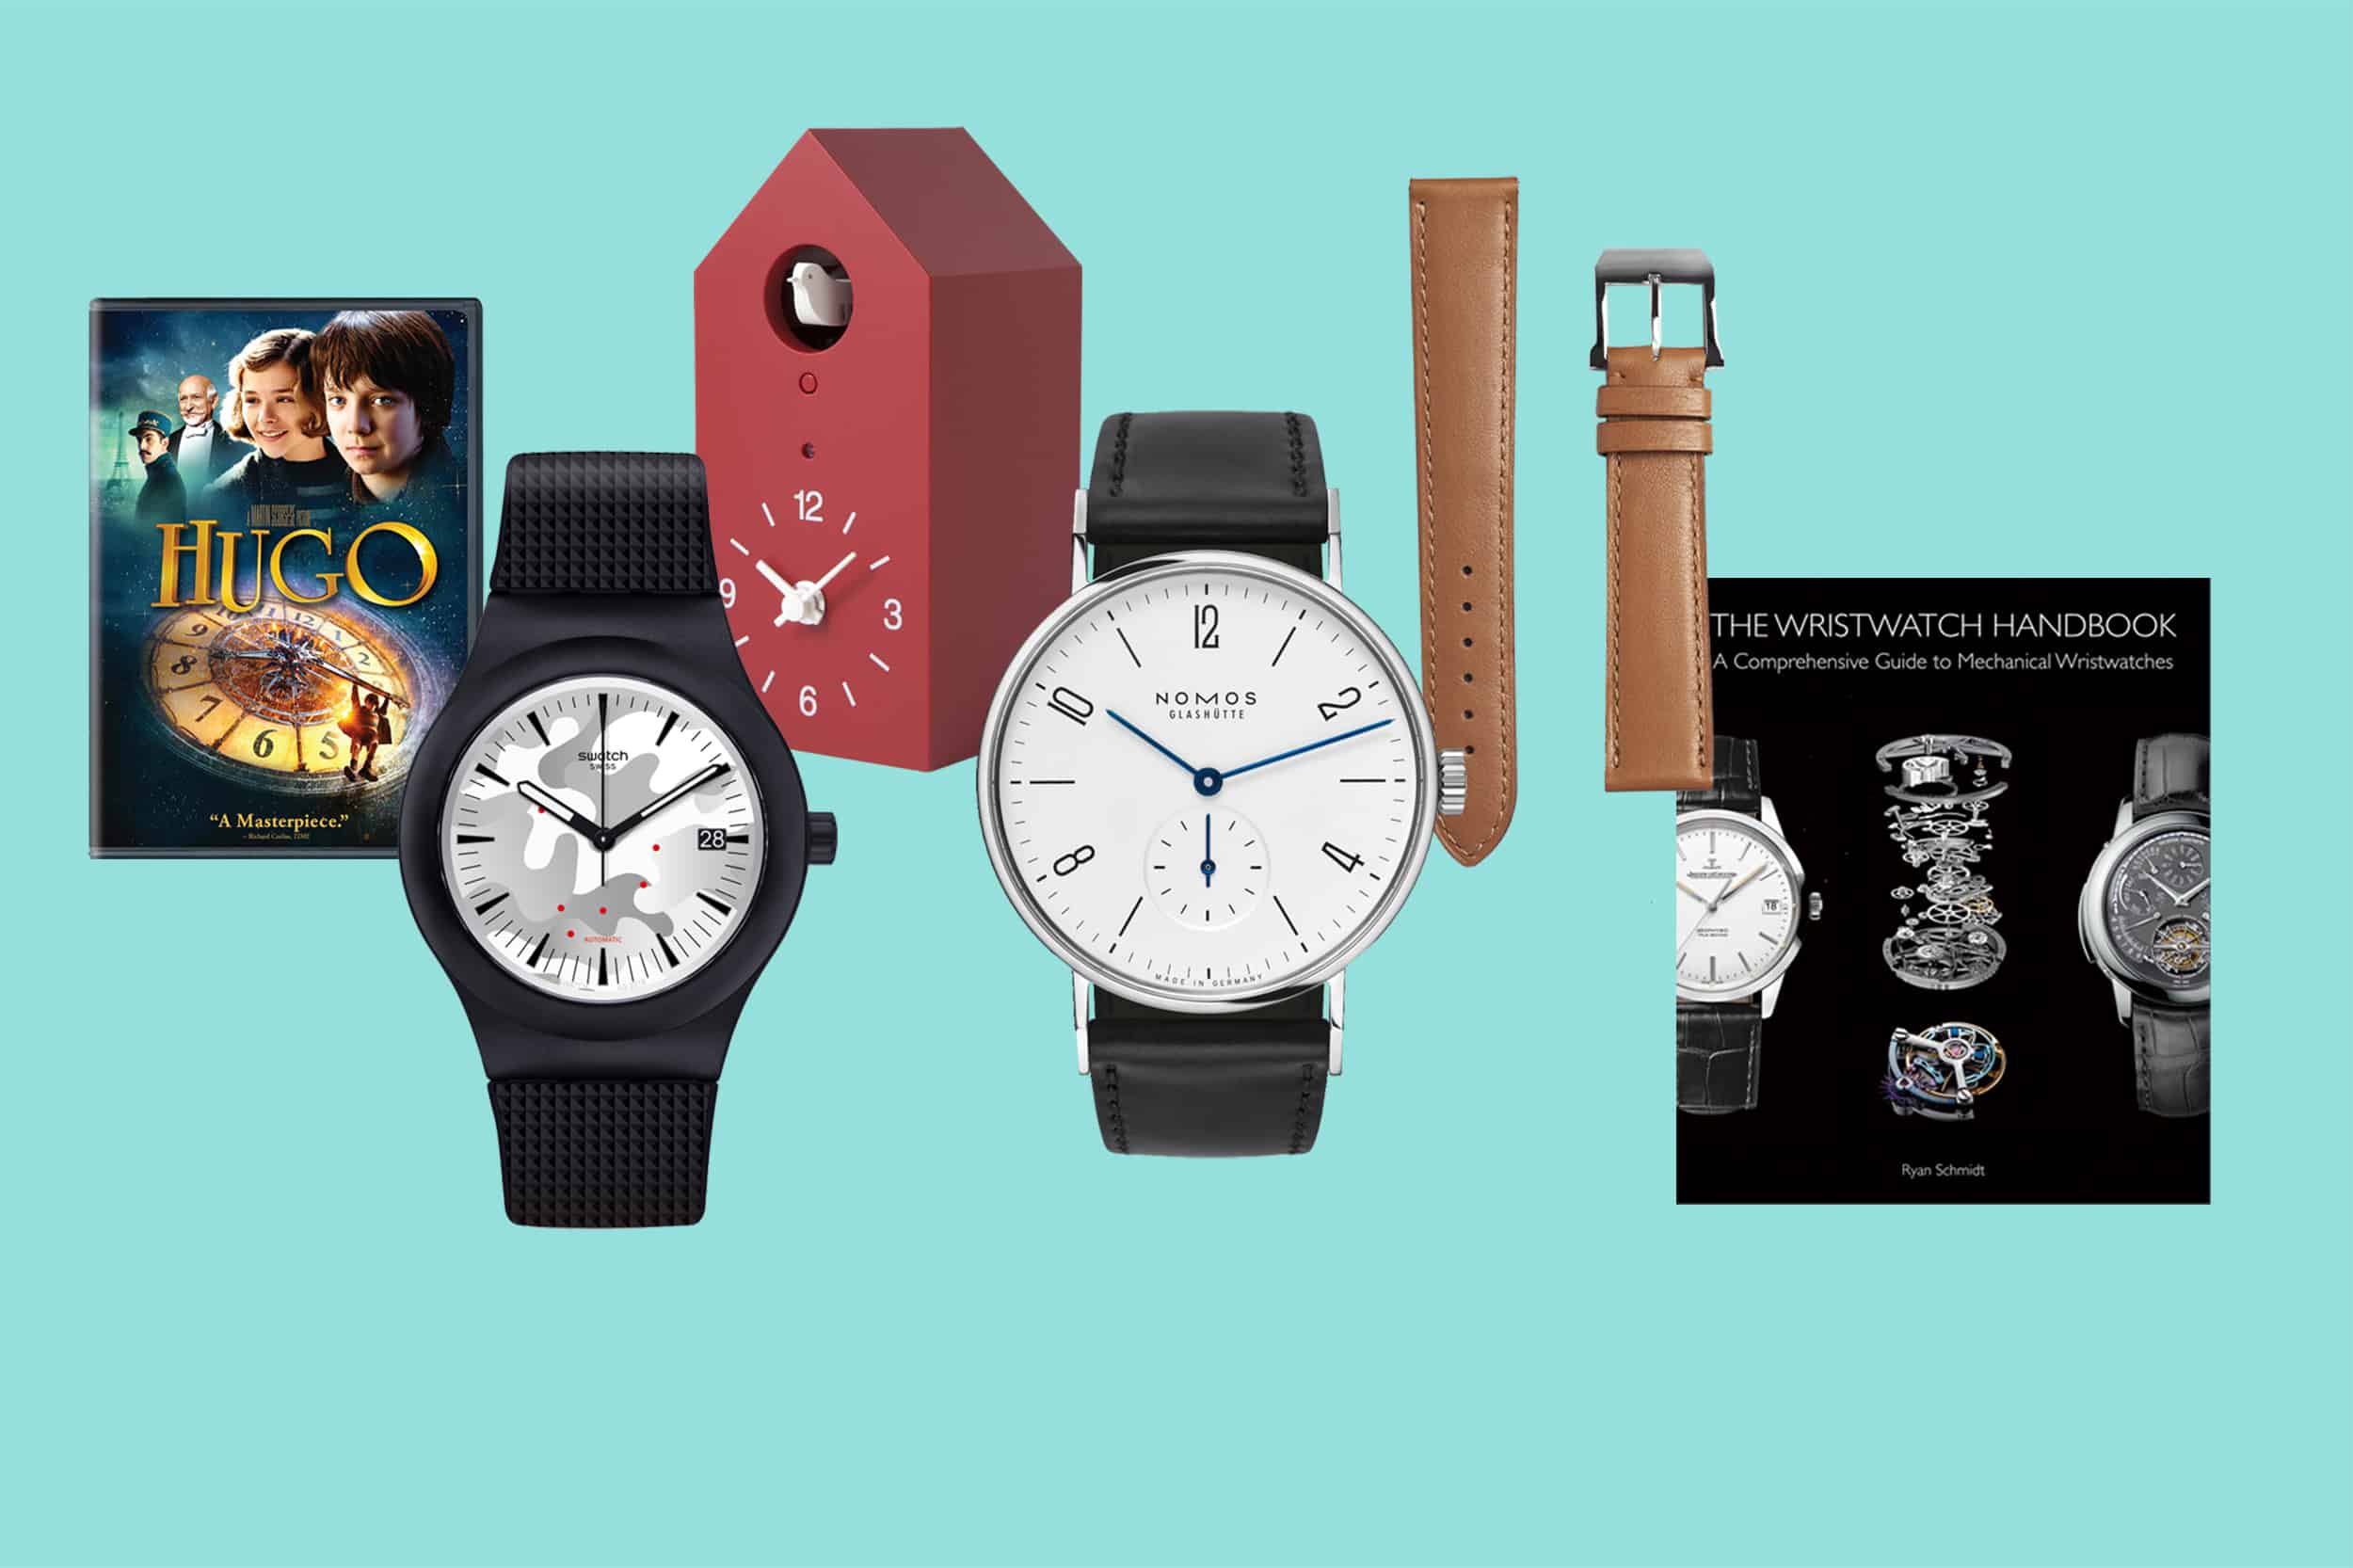 The Worn & Wound Holiday Gift Guide for the Whole Family